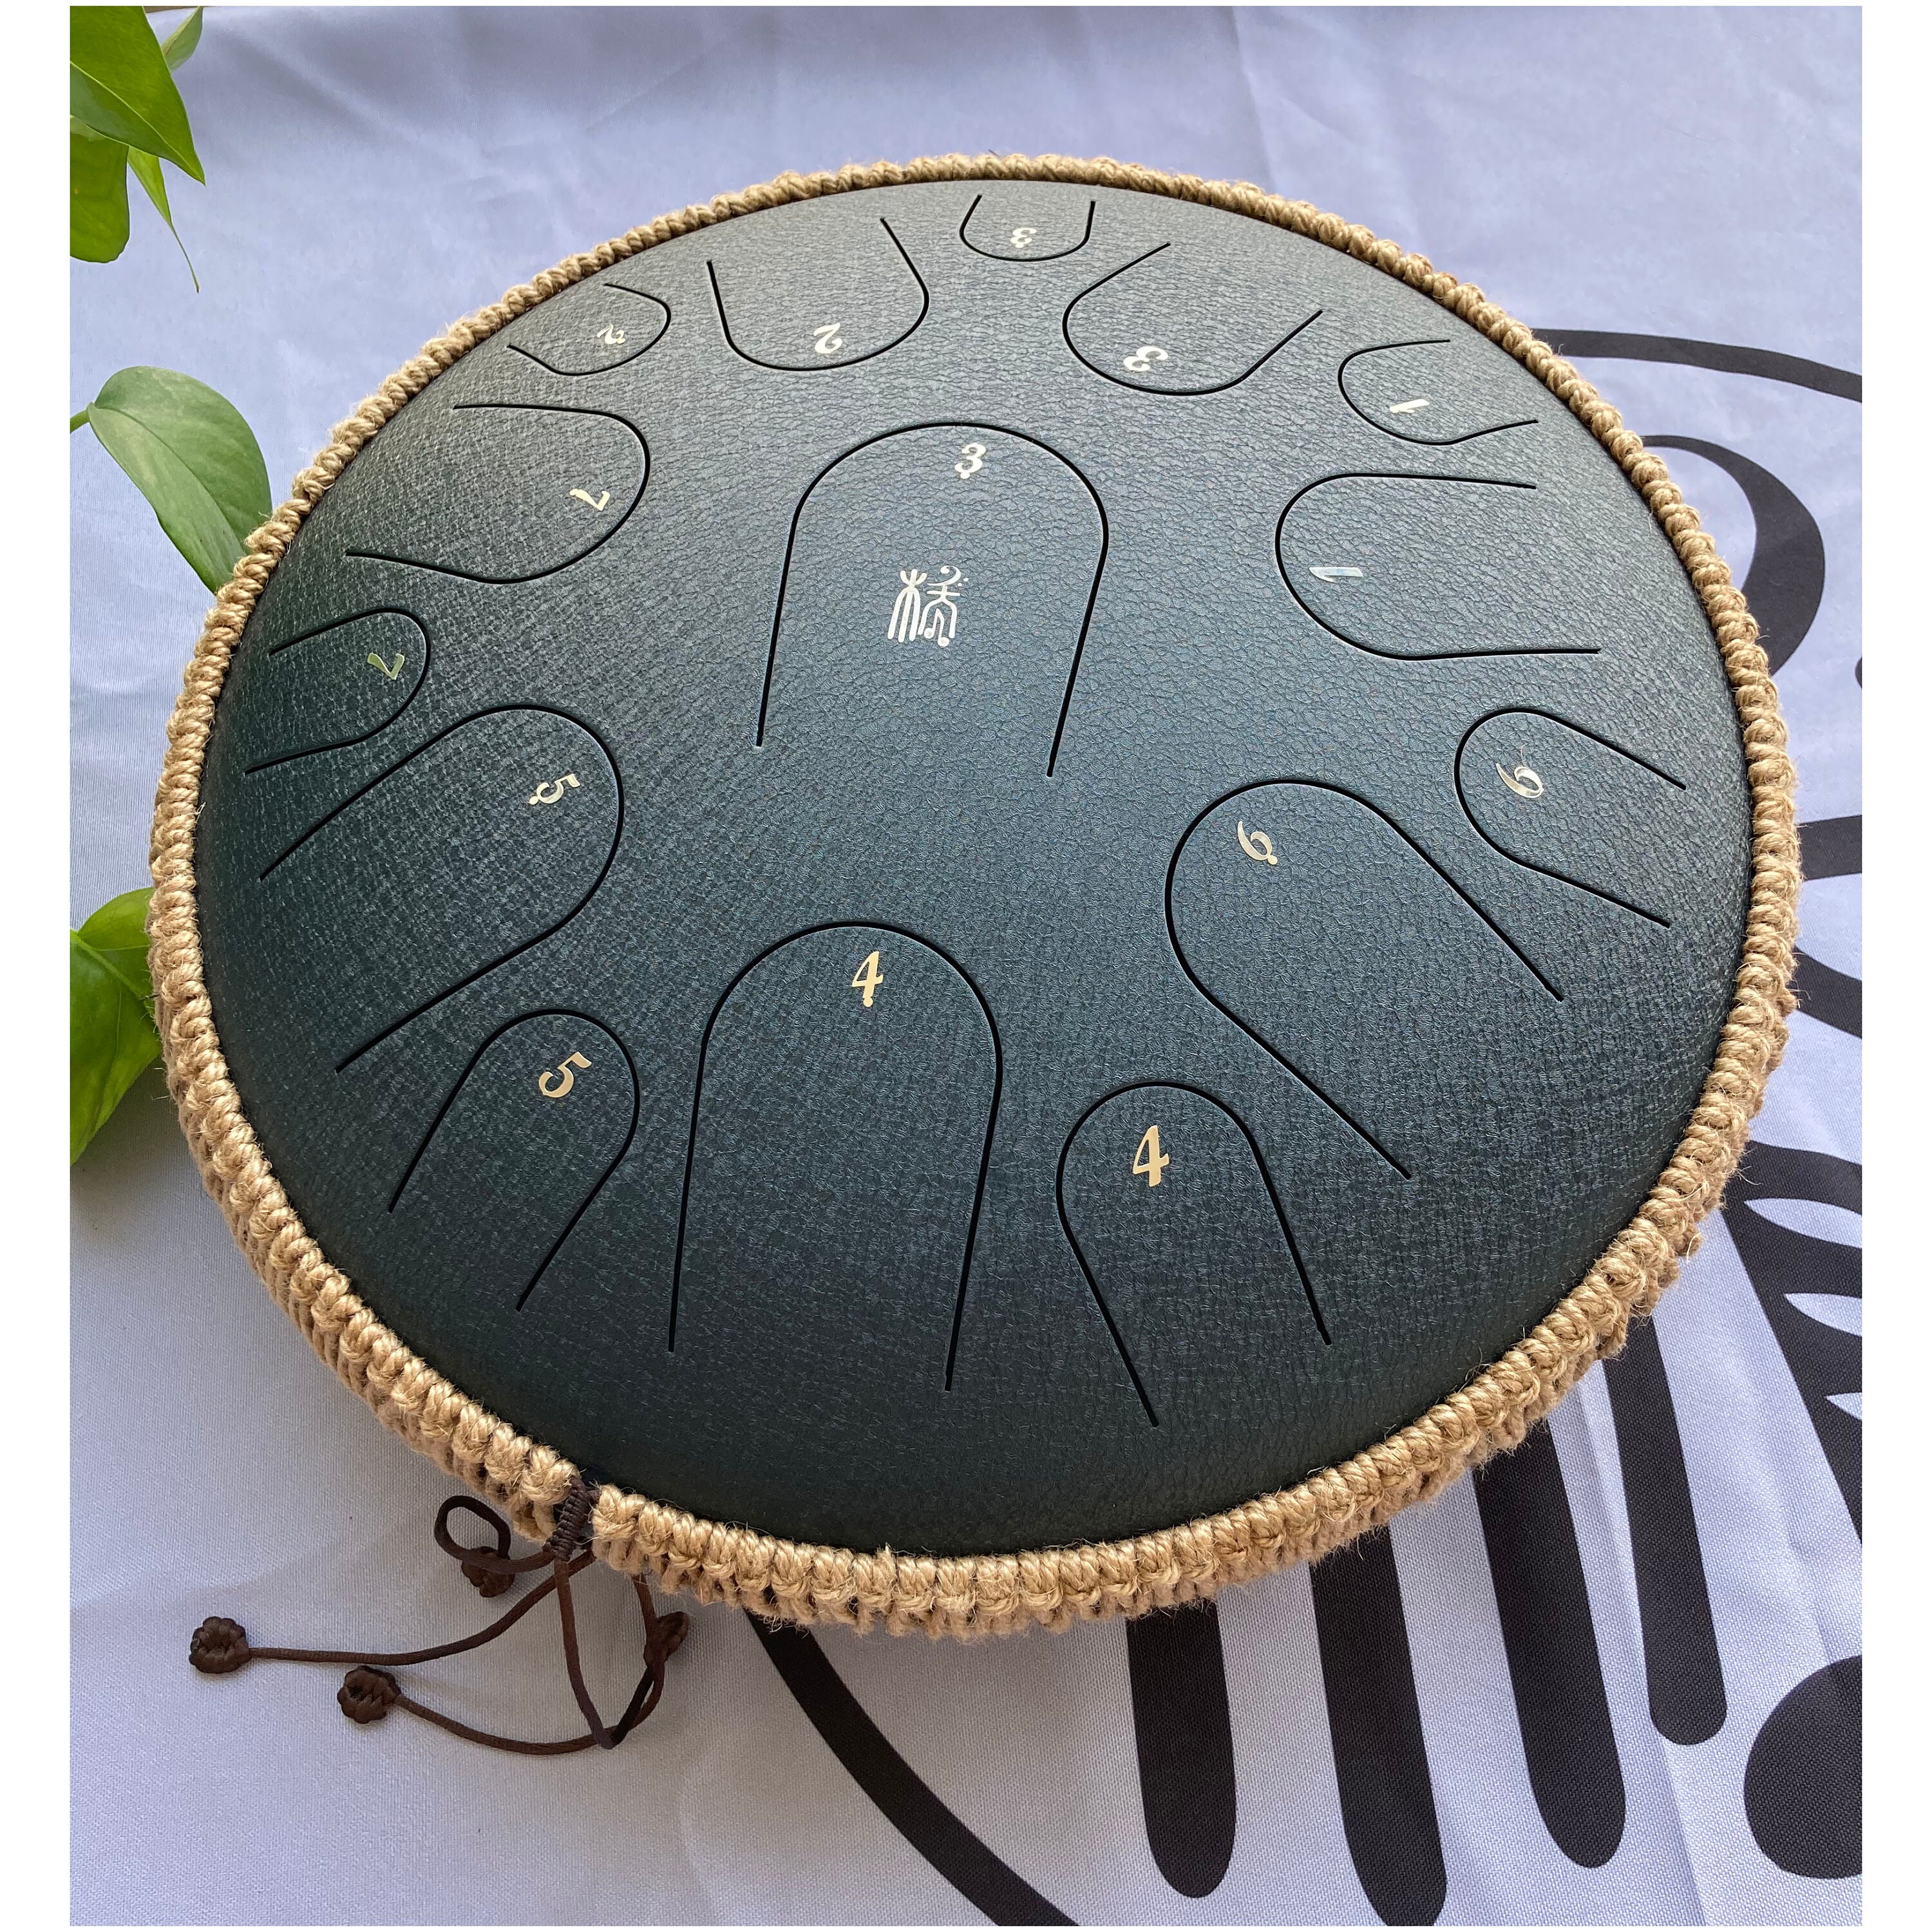 13 Inch Steel Tongue Drum, 15 notes – Life Changing Energy